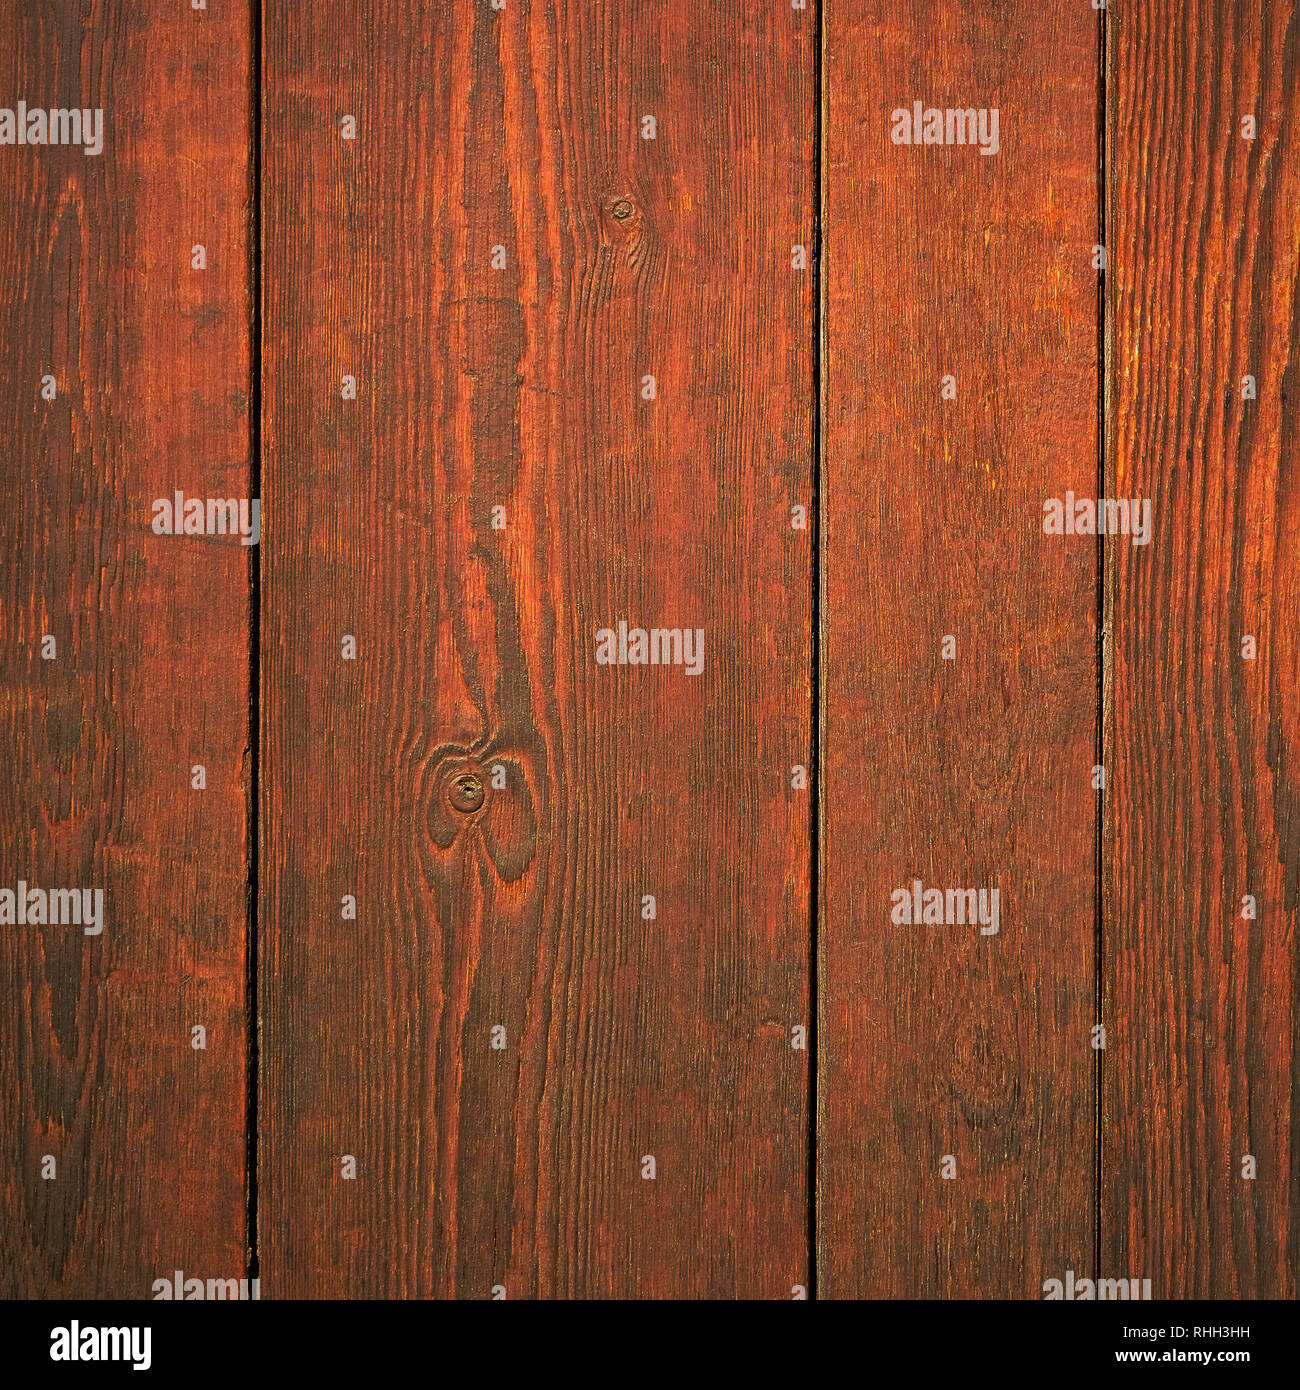 Old wood wall surface background Stock Photo